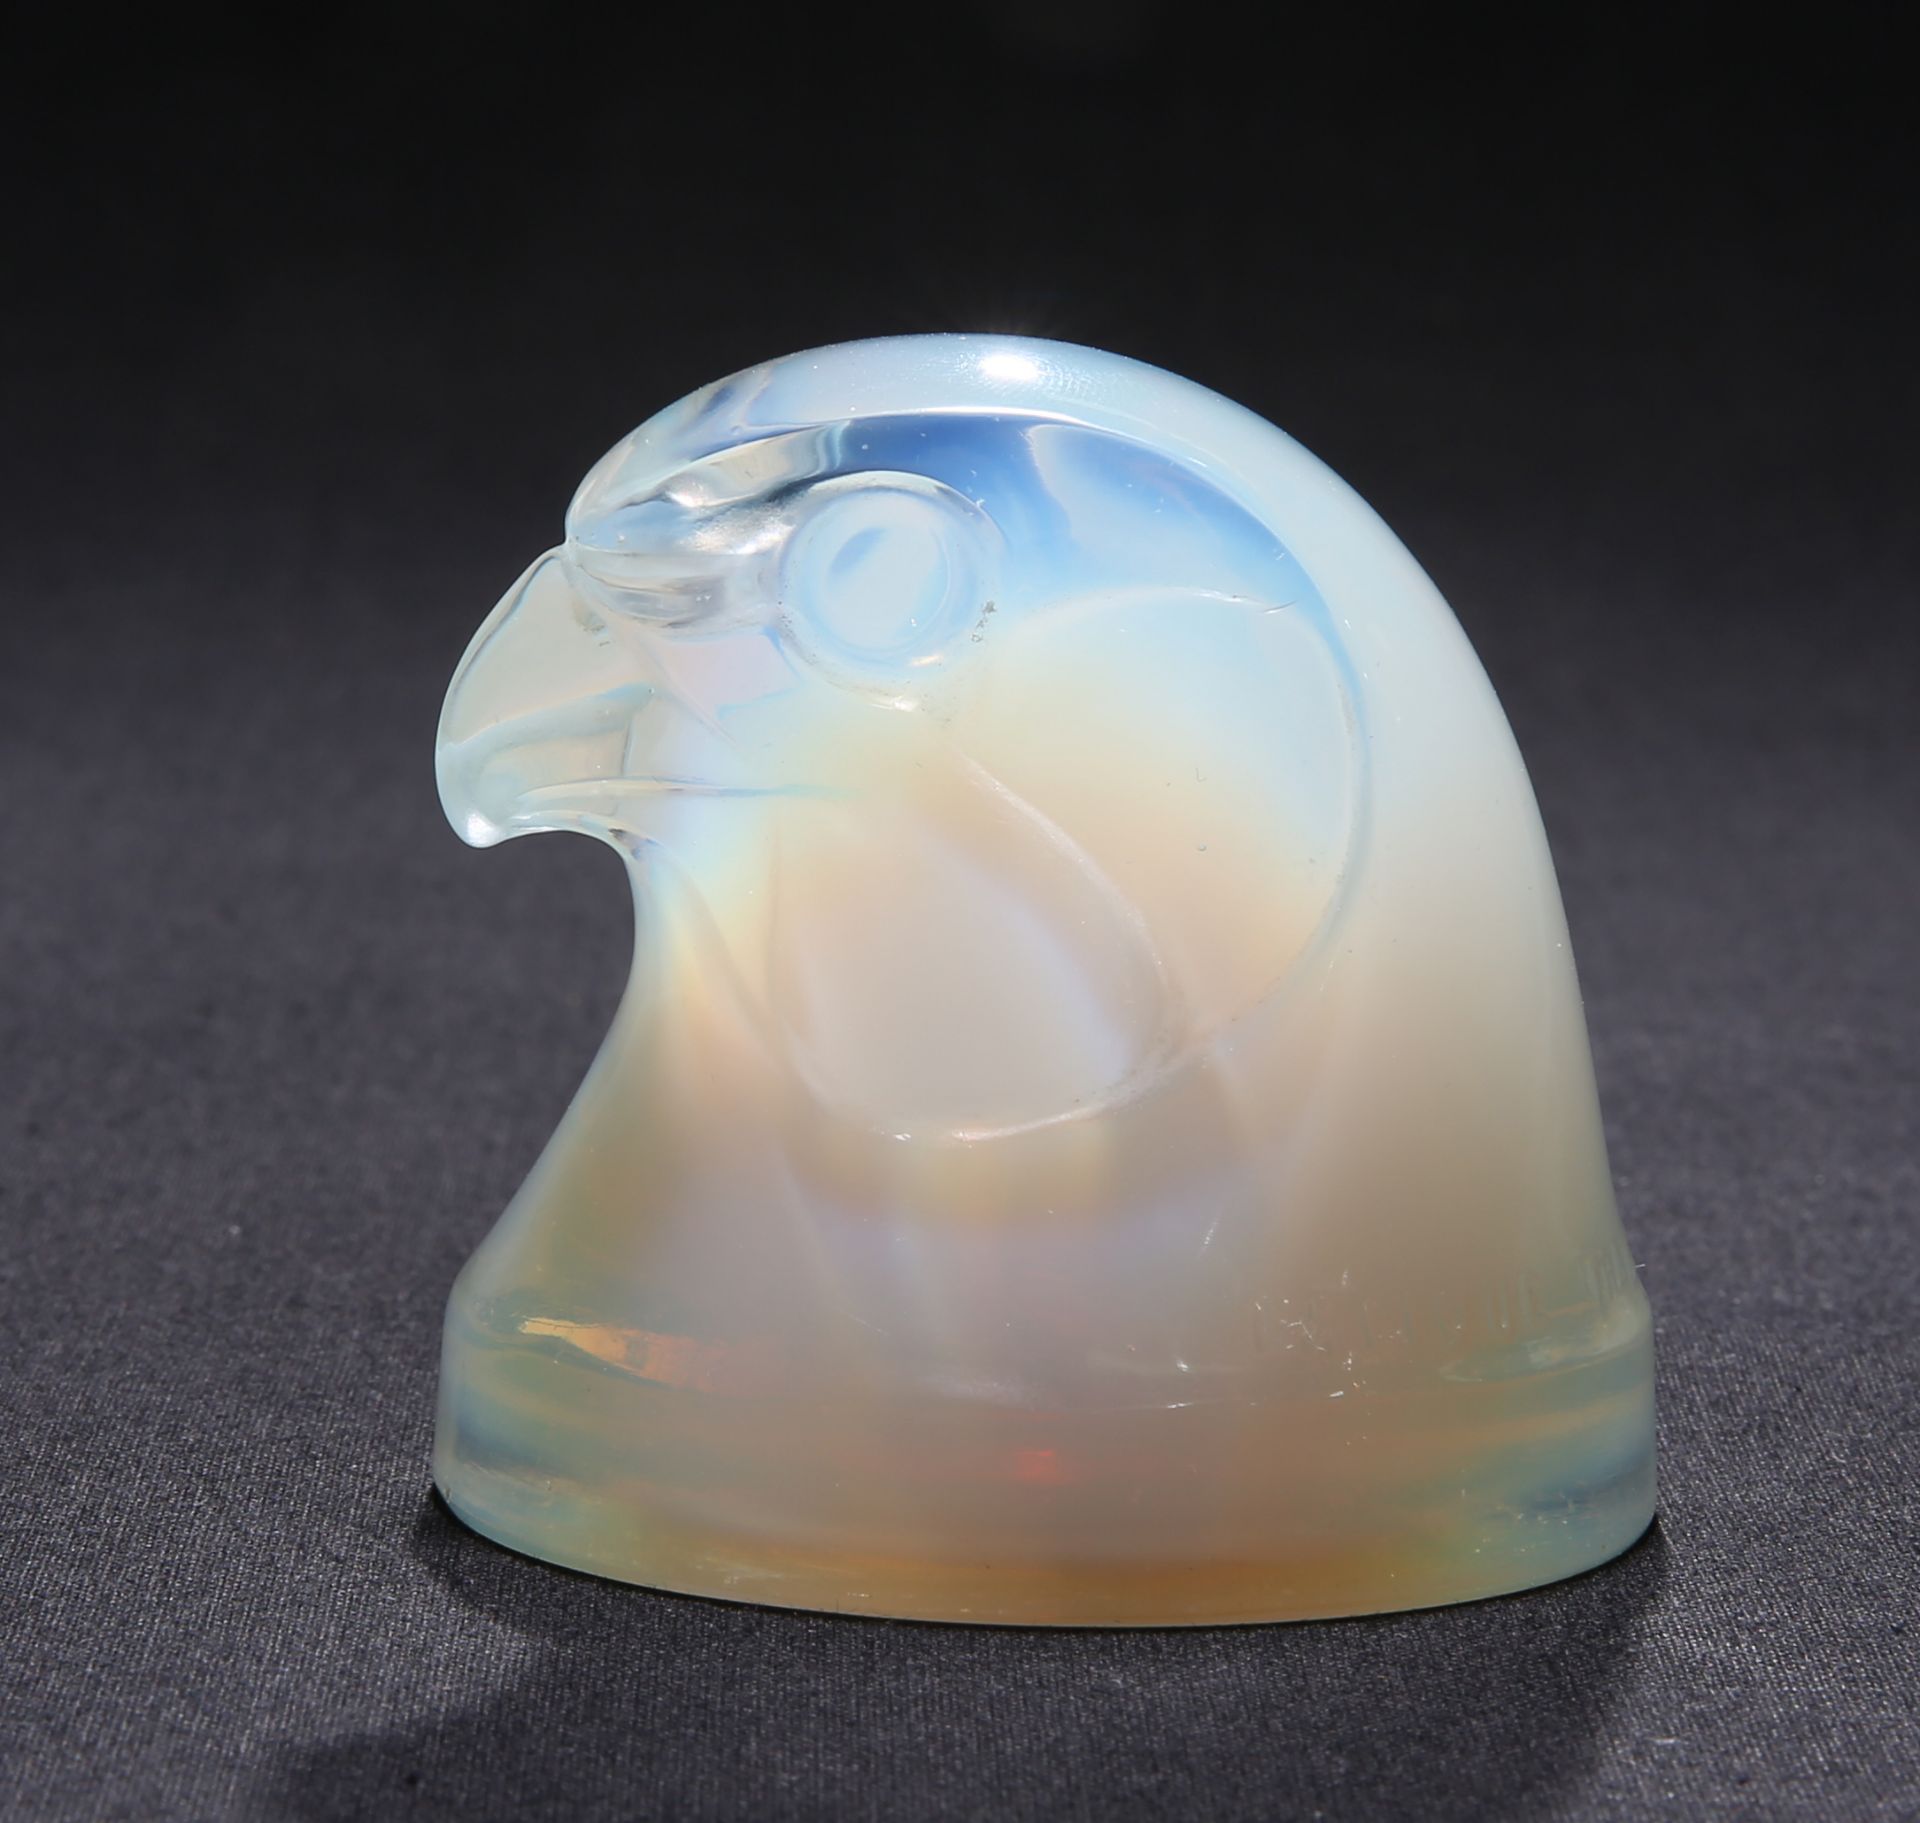 RENÉ LALIQUE (FRENCH, 1860-1945) A 'TETE D'EPERVIER' CAR MASCOT, DESIGNED IN 1928, opalescent glass,